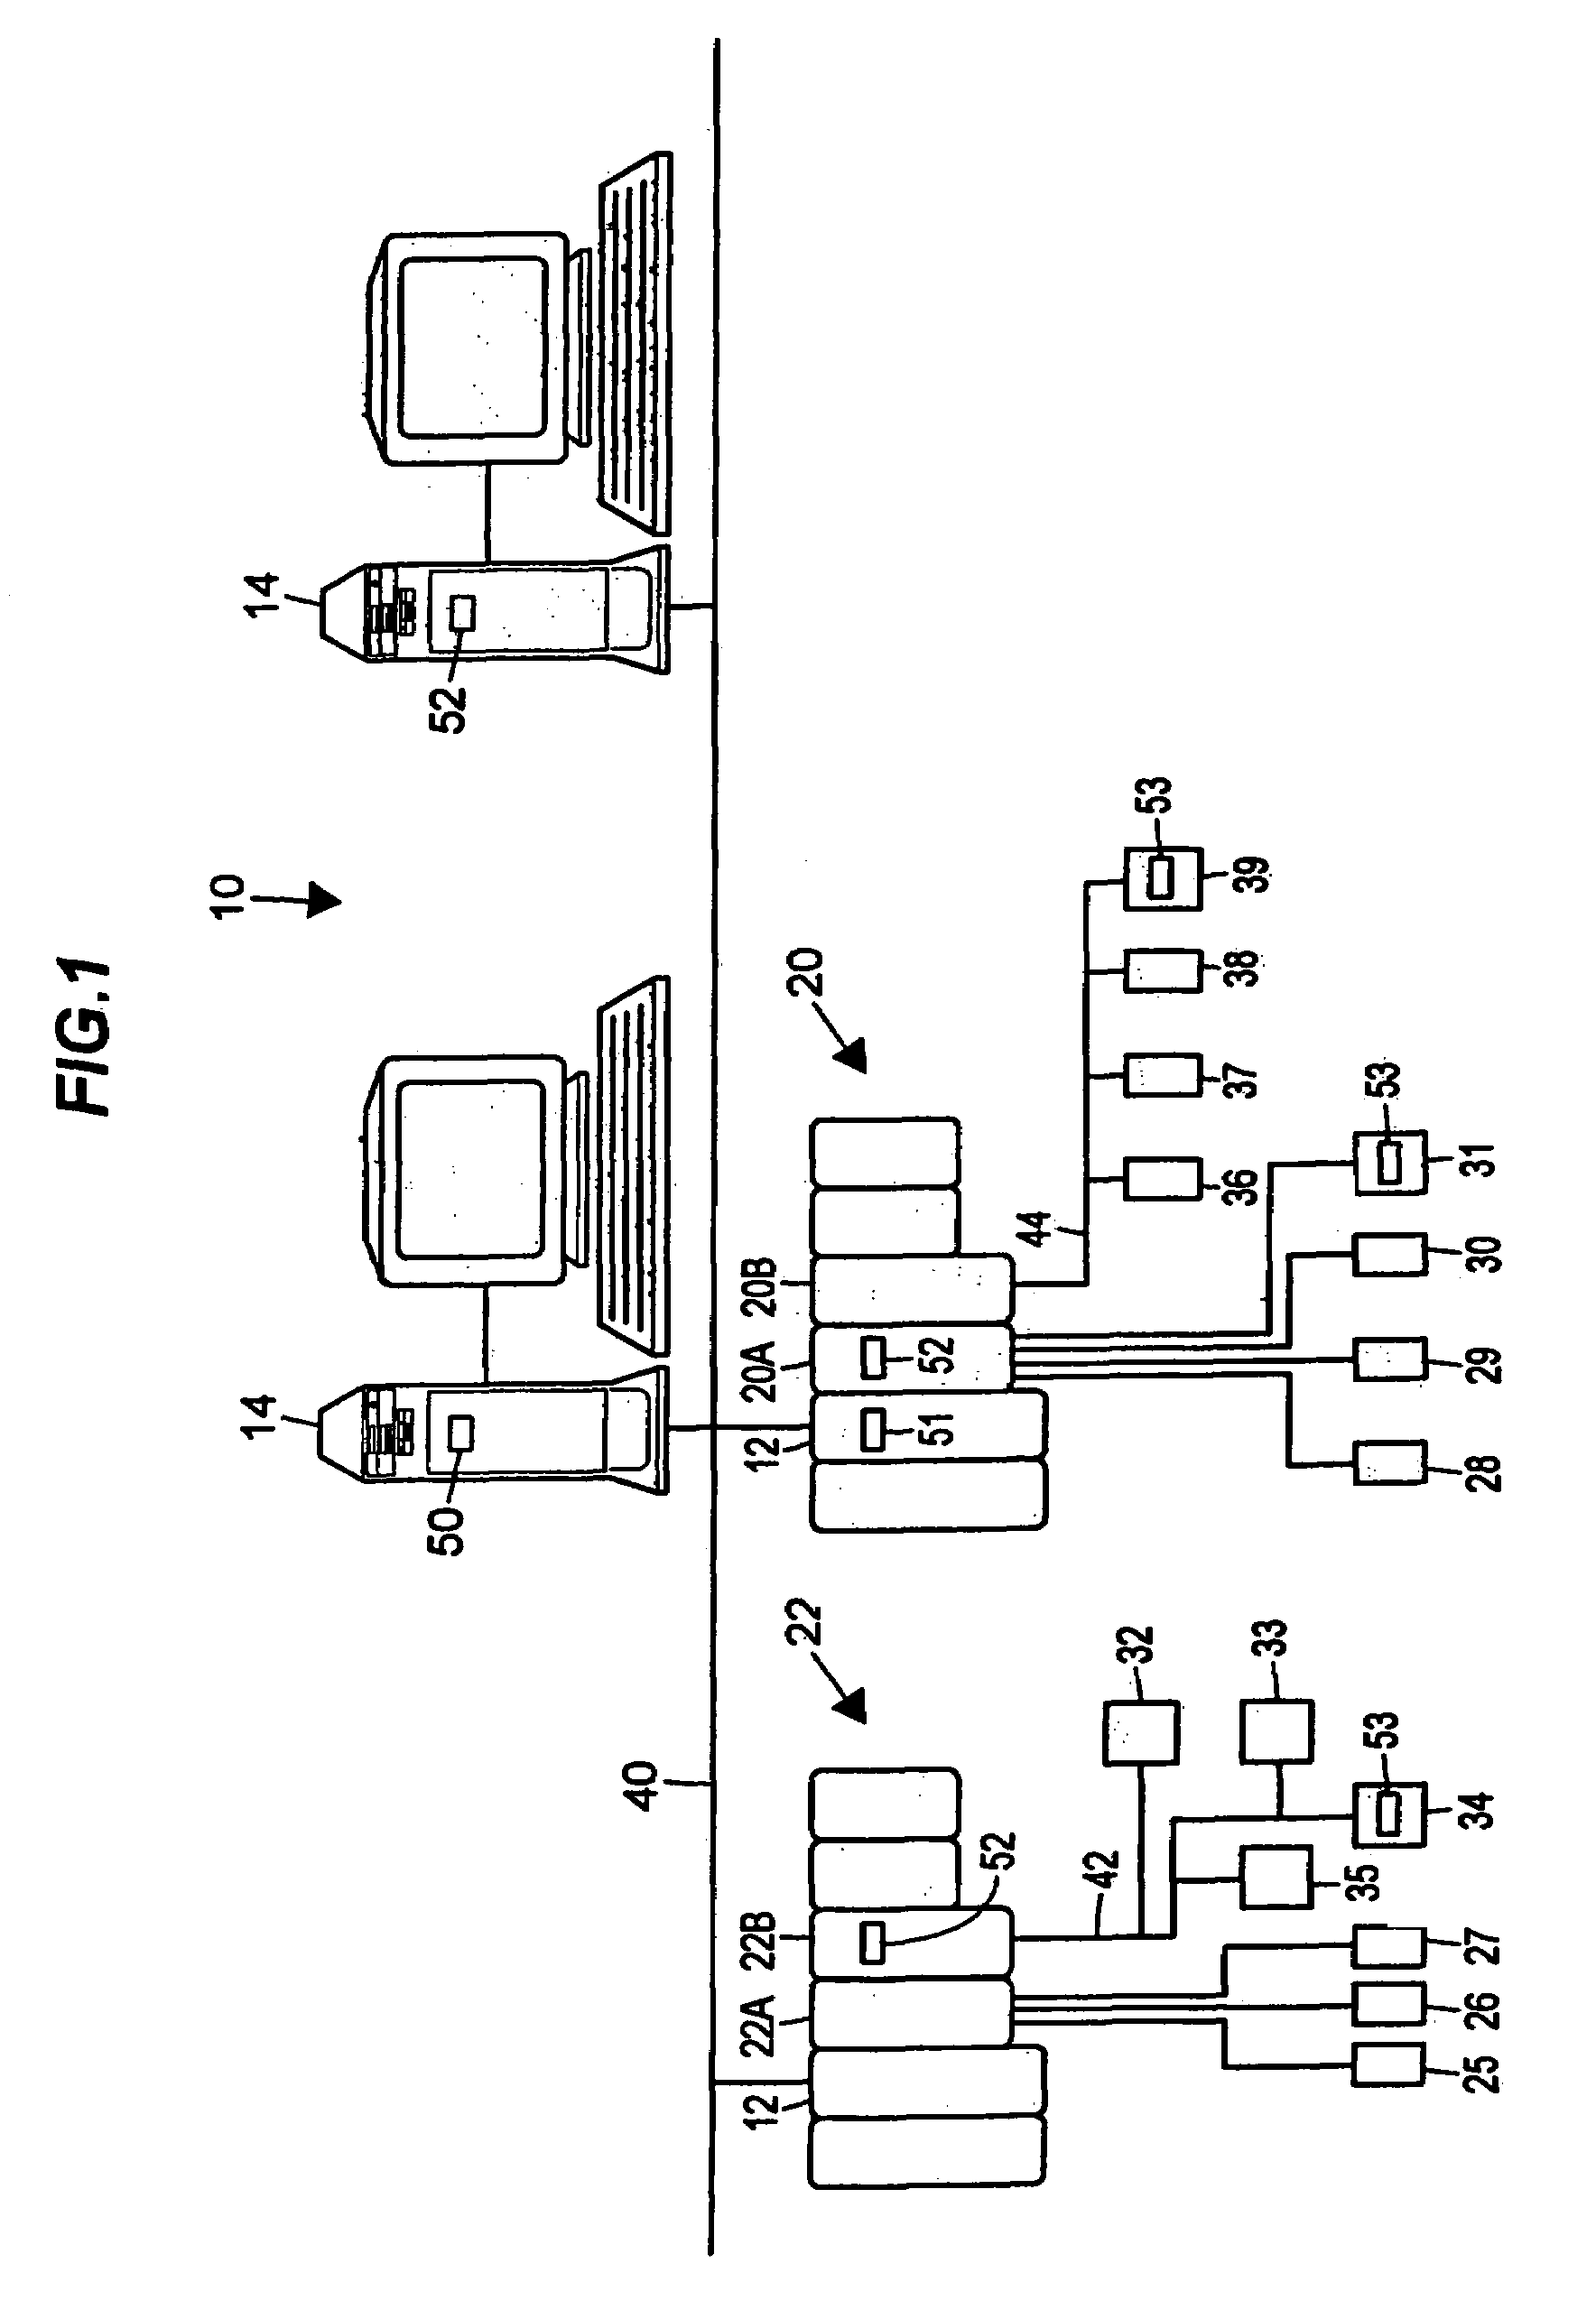 Integrated alarm display in a process control network